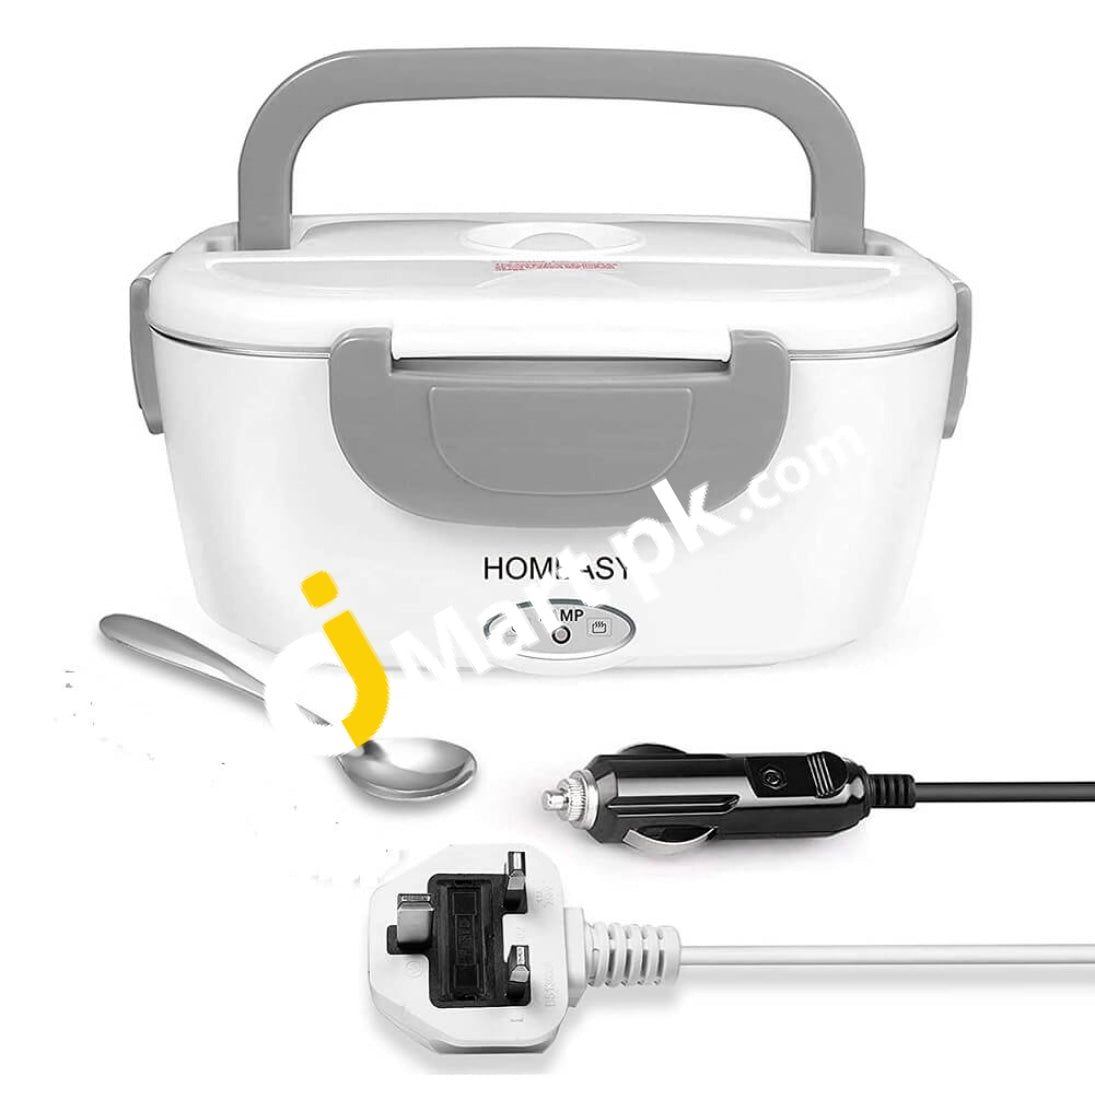 1.5l Removable Electric Lunch Box Food Heater, Portable Food